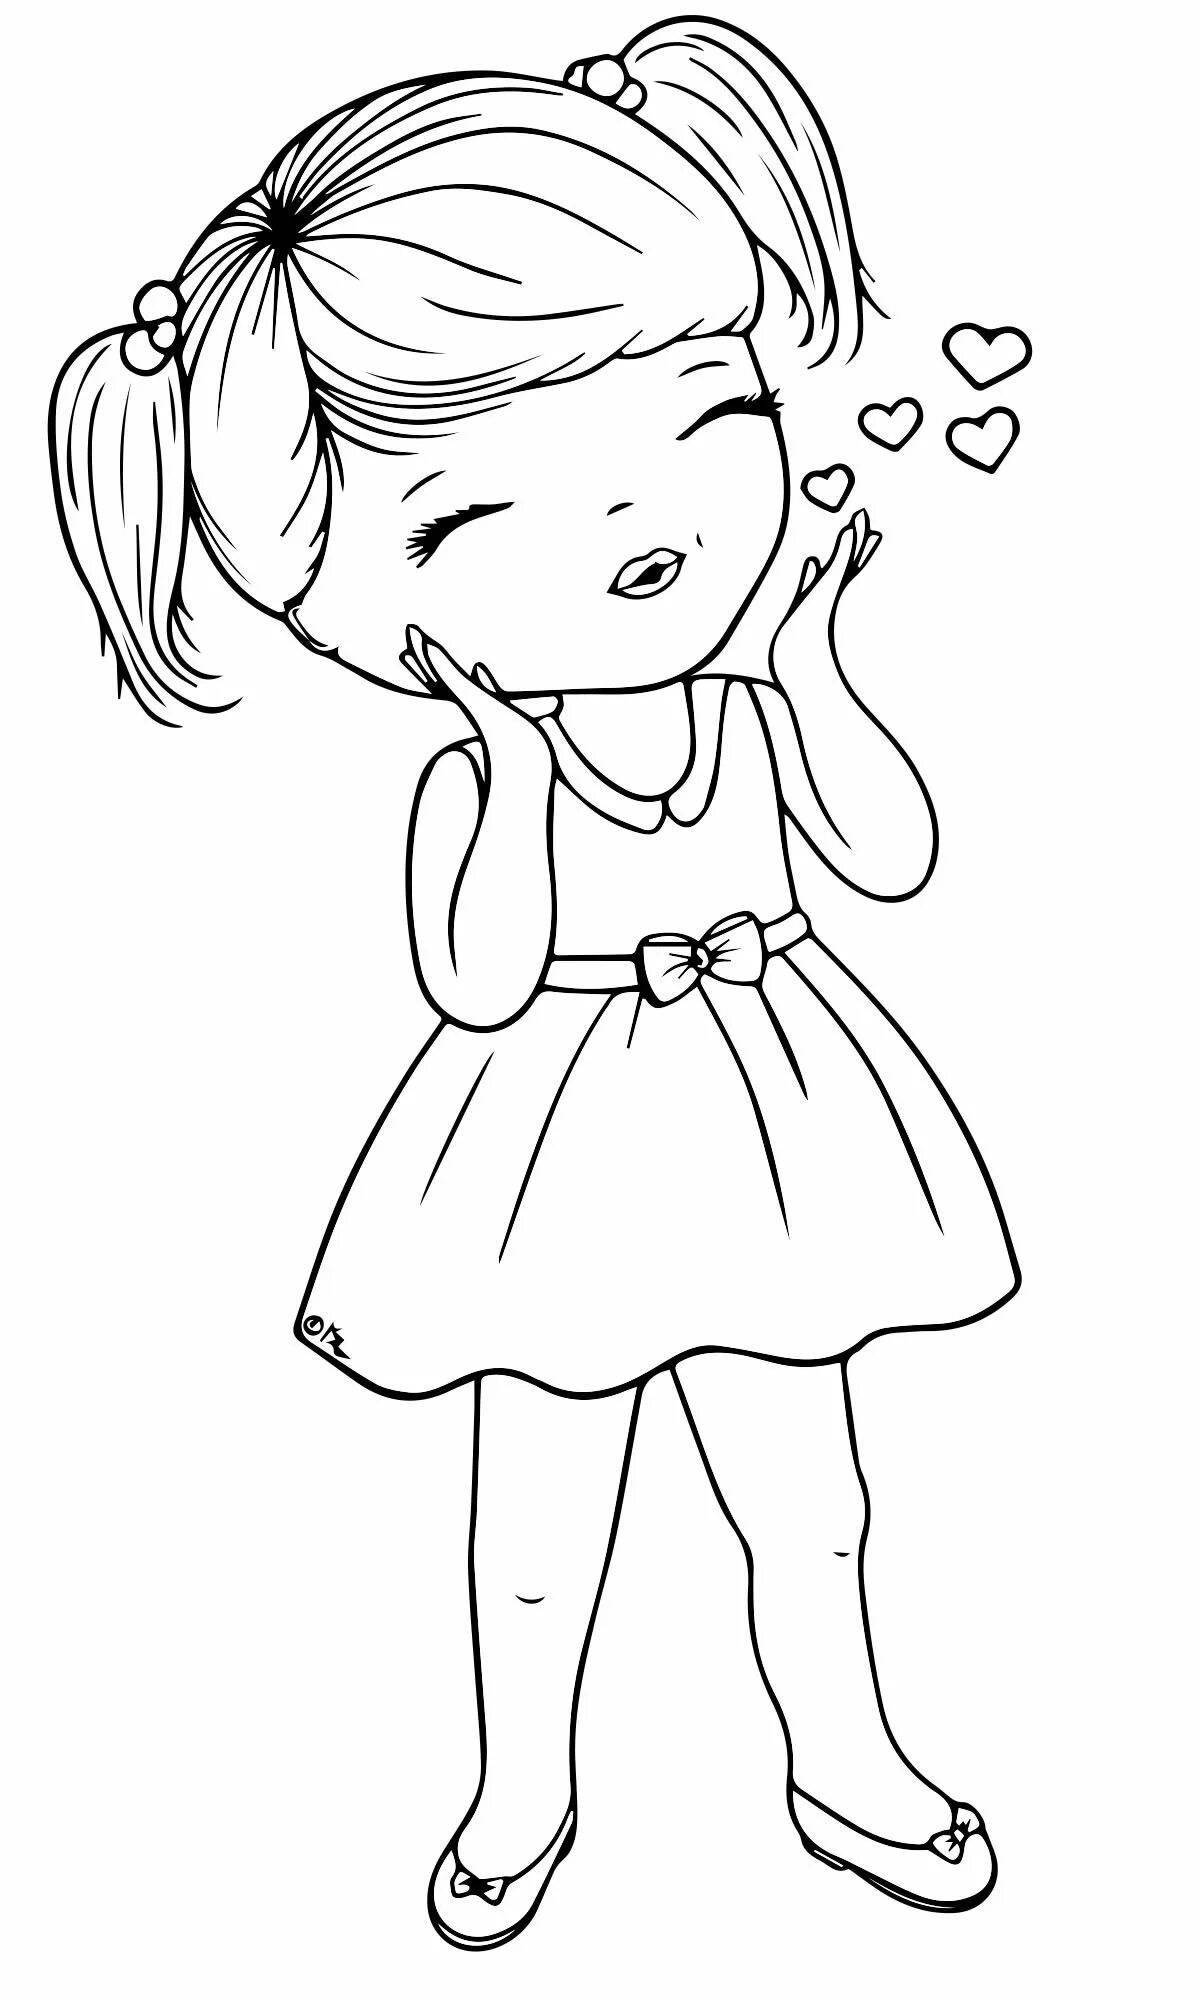 Joyful coloring pages for little girls